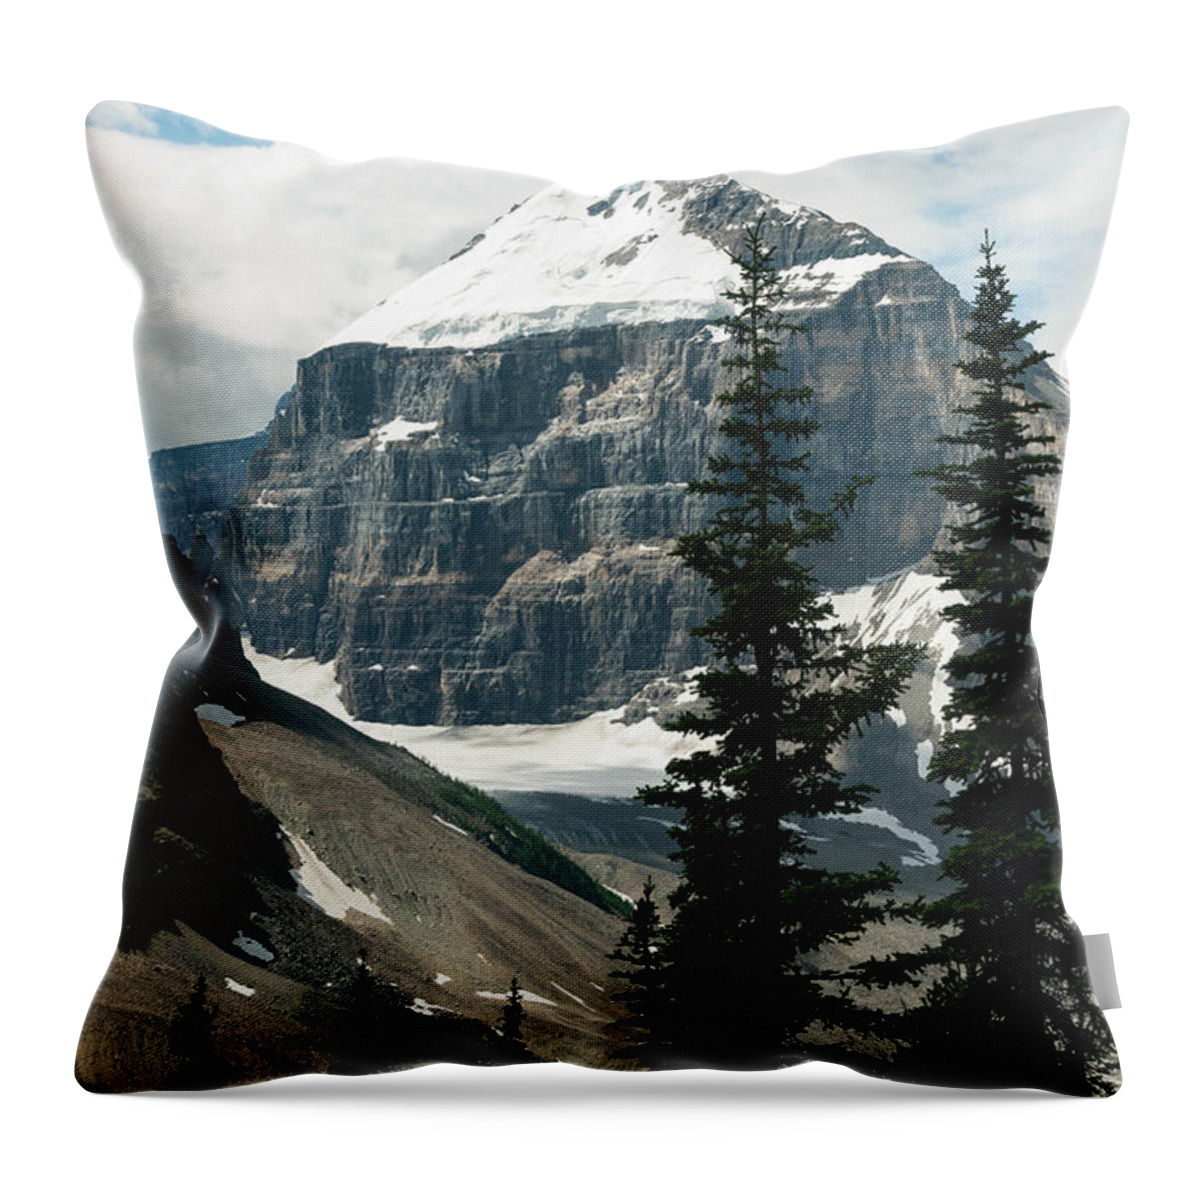 Scenics Throw Pillow featuring the photograph Plain Of Six Glaciers Trail, Mt Lefroy by John Elk Iii